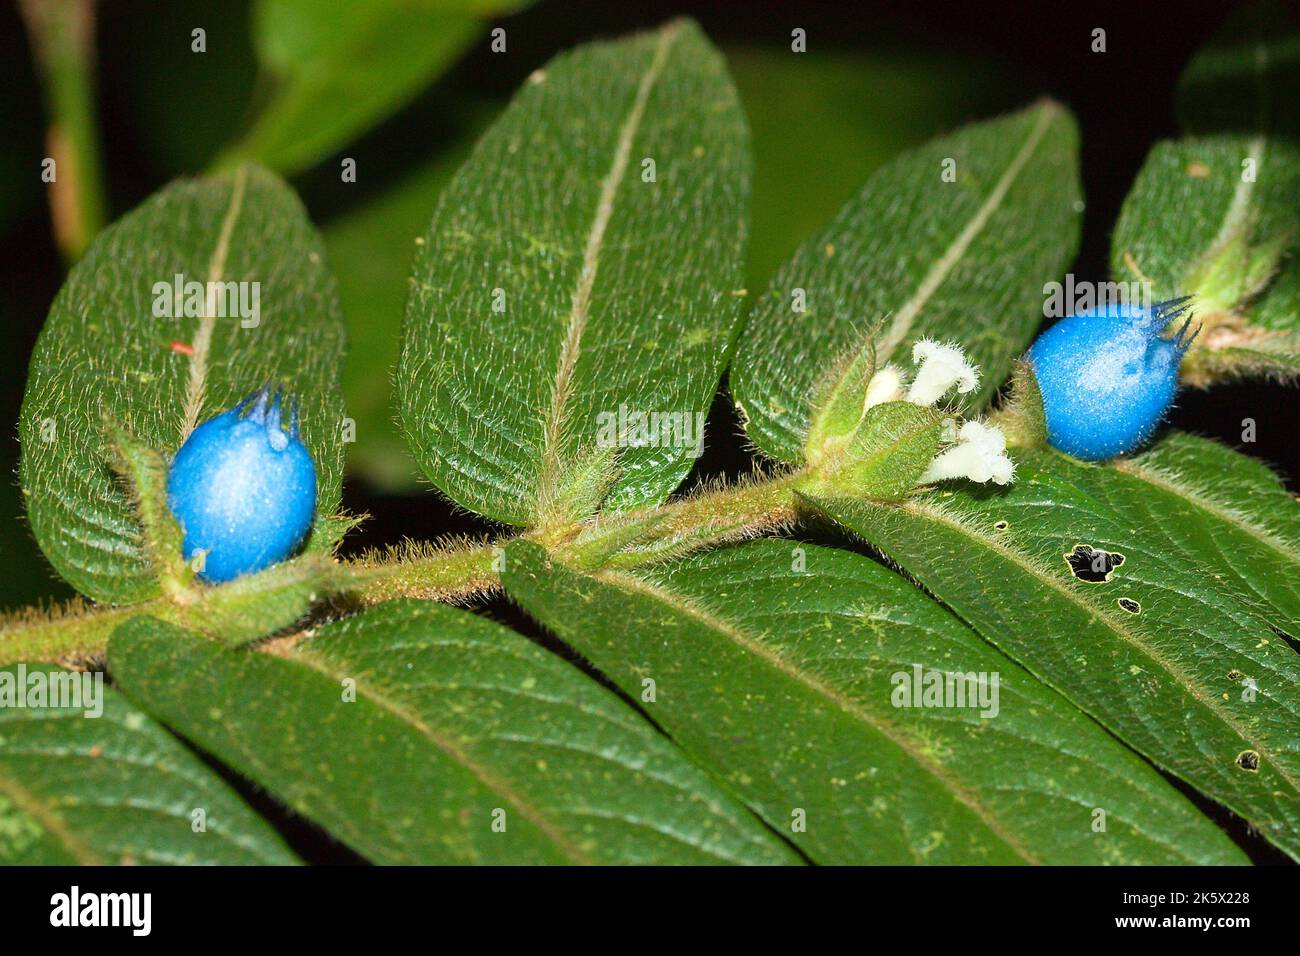 Small-leaved lasianthus (Lasianthus attenuatus) flower with blue fruit and white bloom in tropical rainforest in Borneo, Brunei Stock Photo